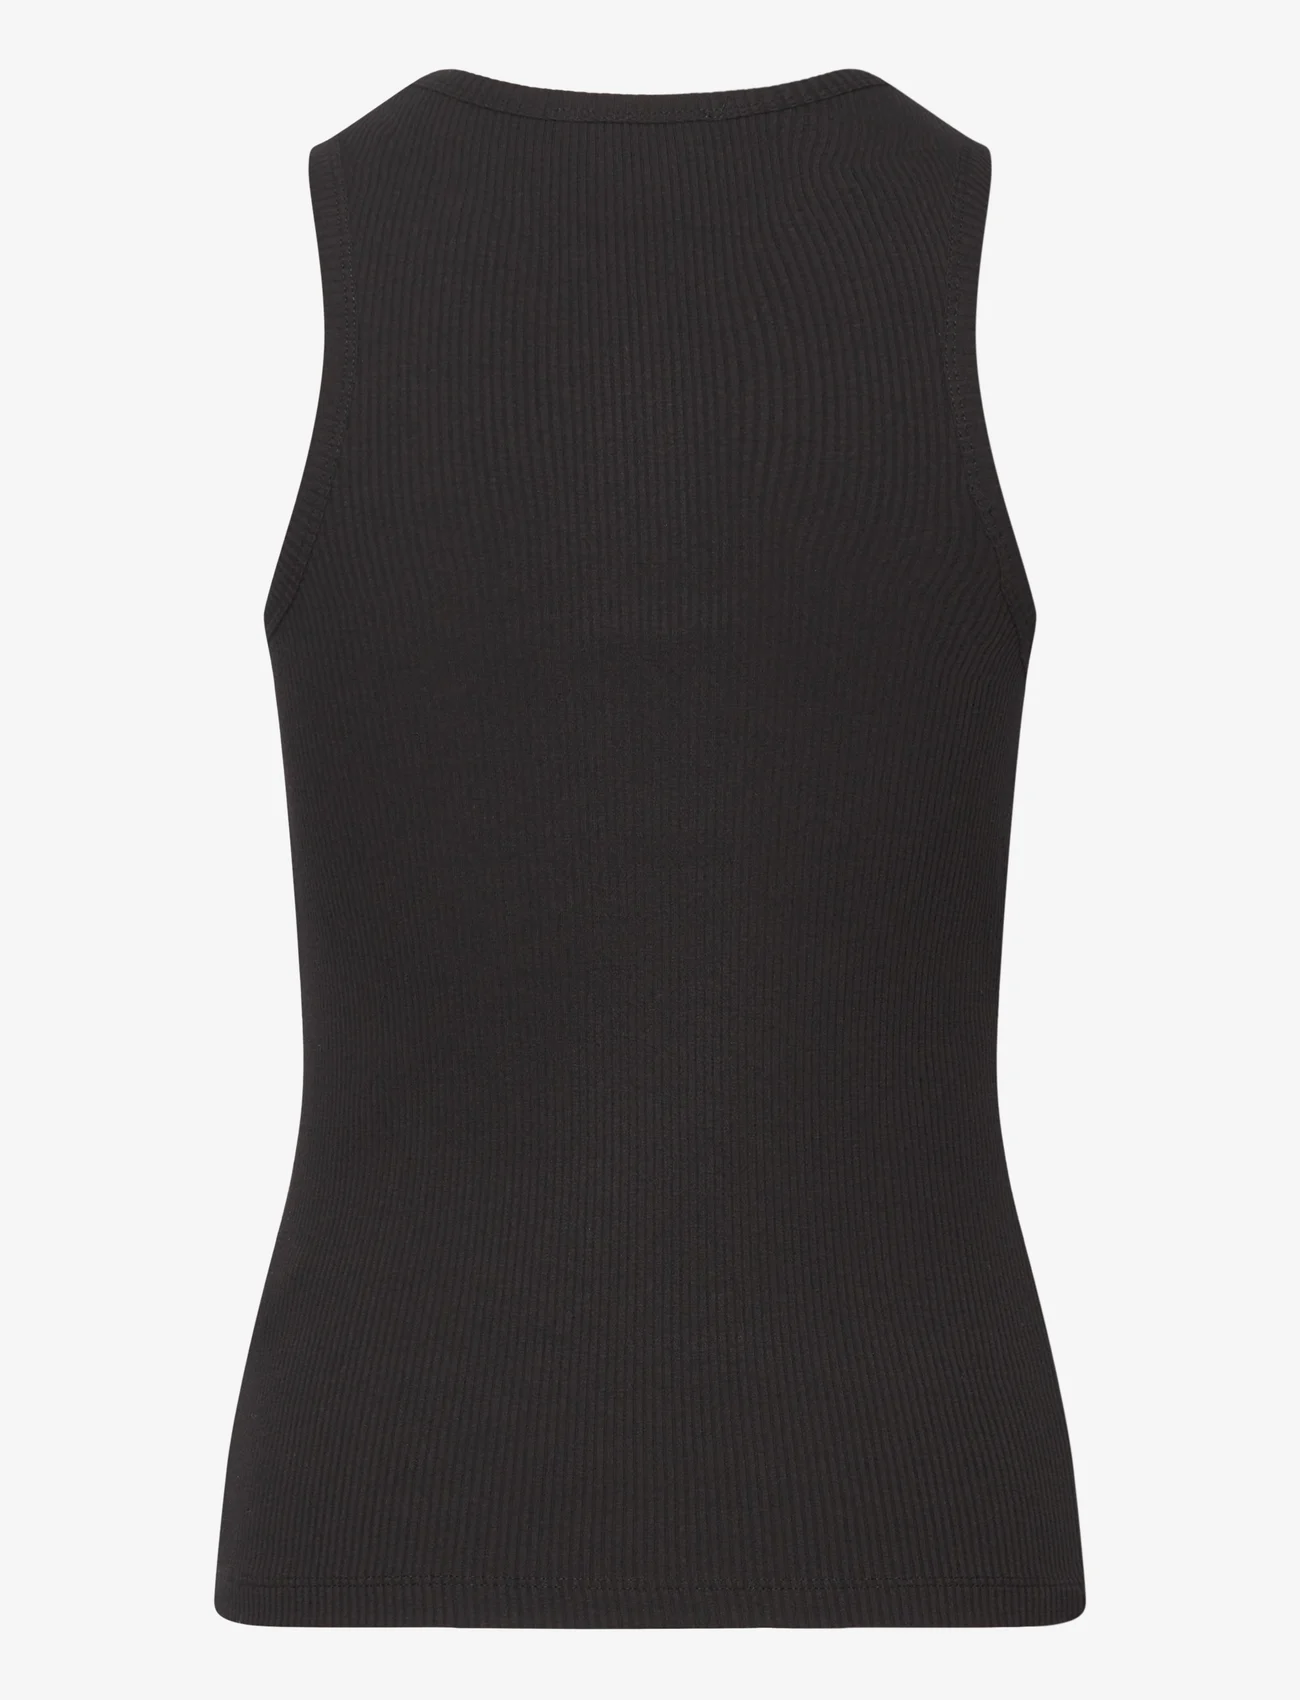 Selected Femme - SLFANNA O-NECK TANK TOP NOOS - lowest prices - black - 1